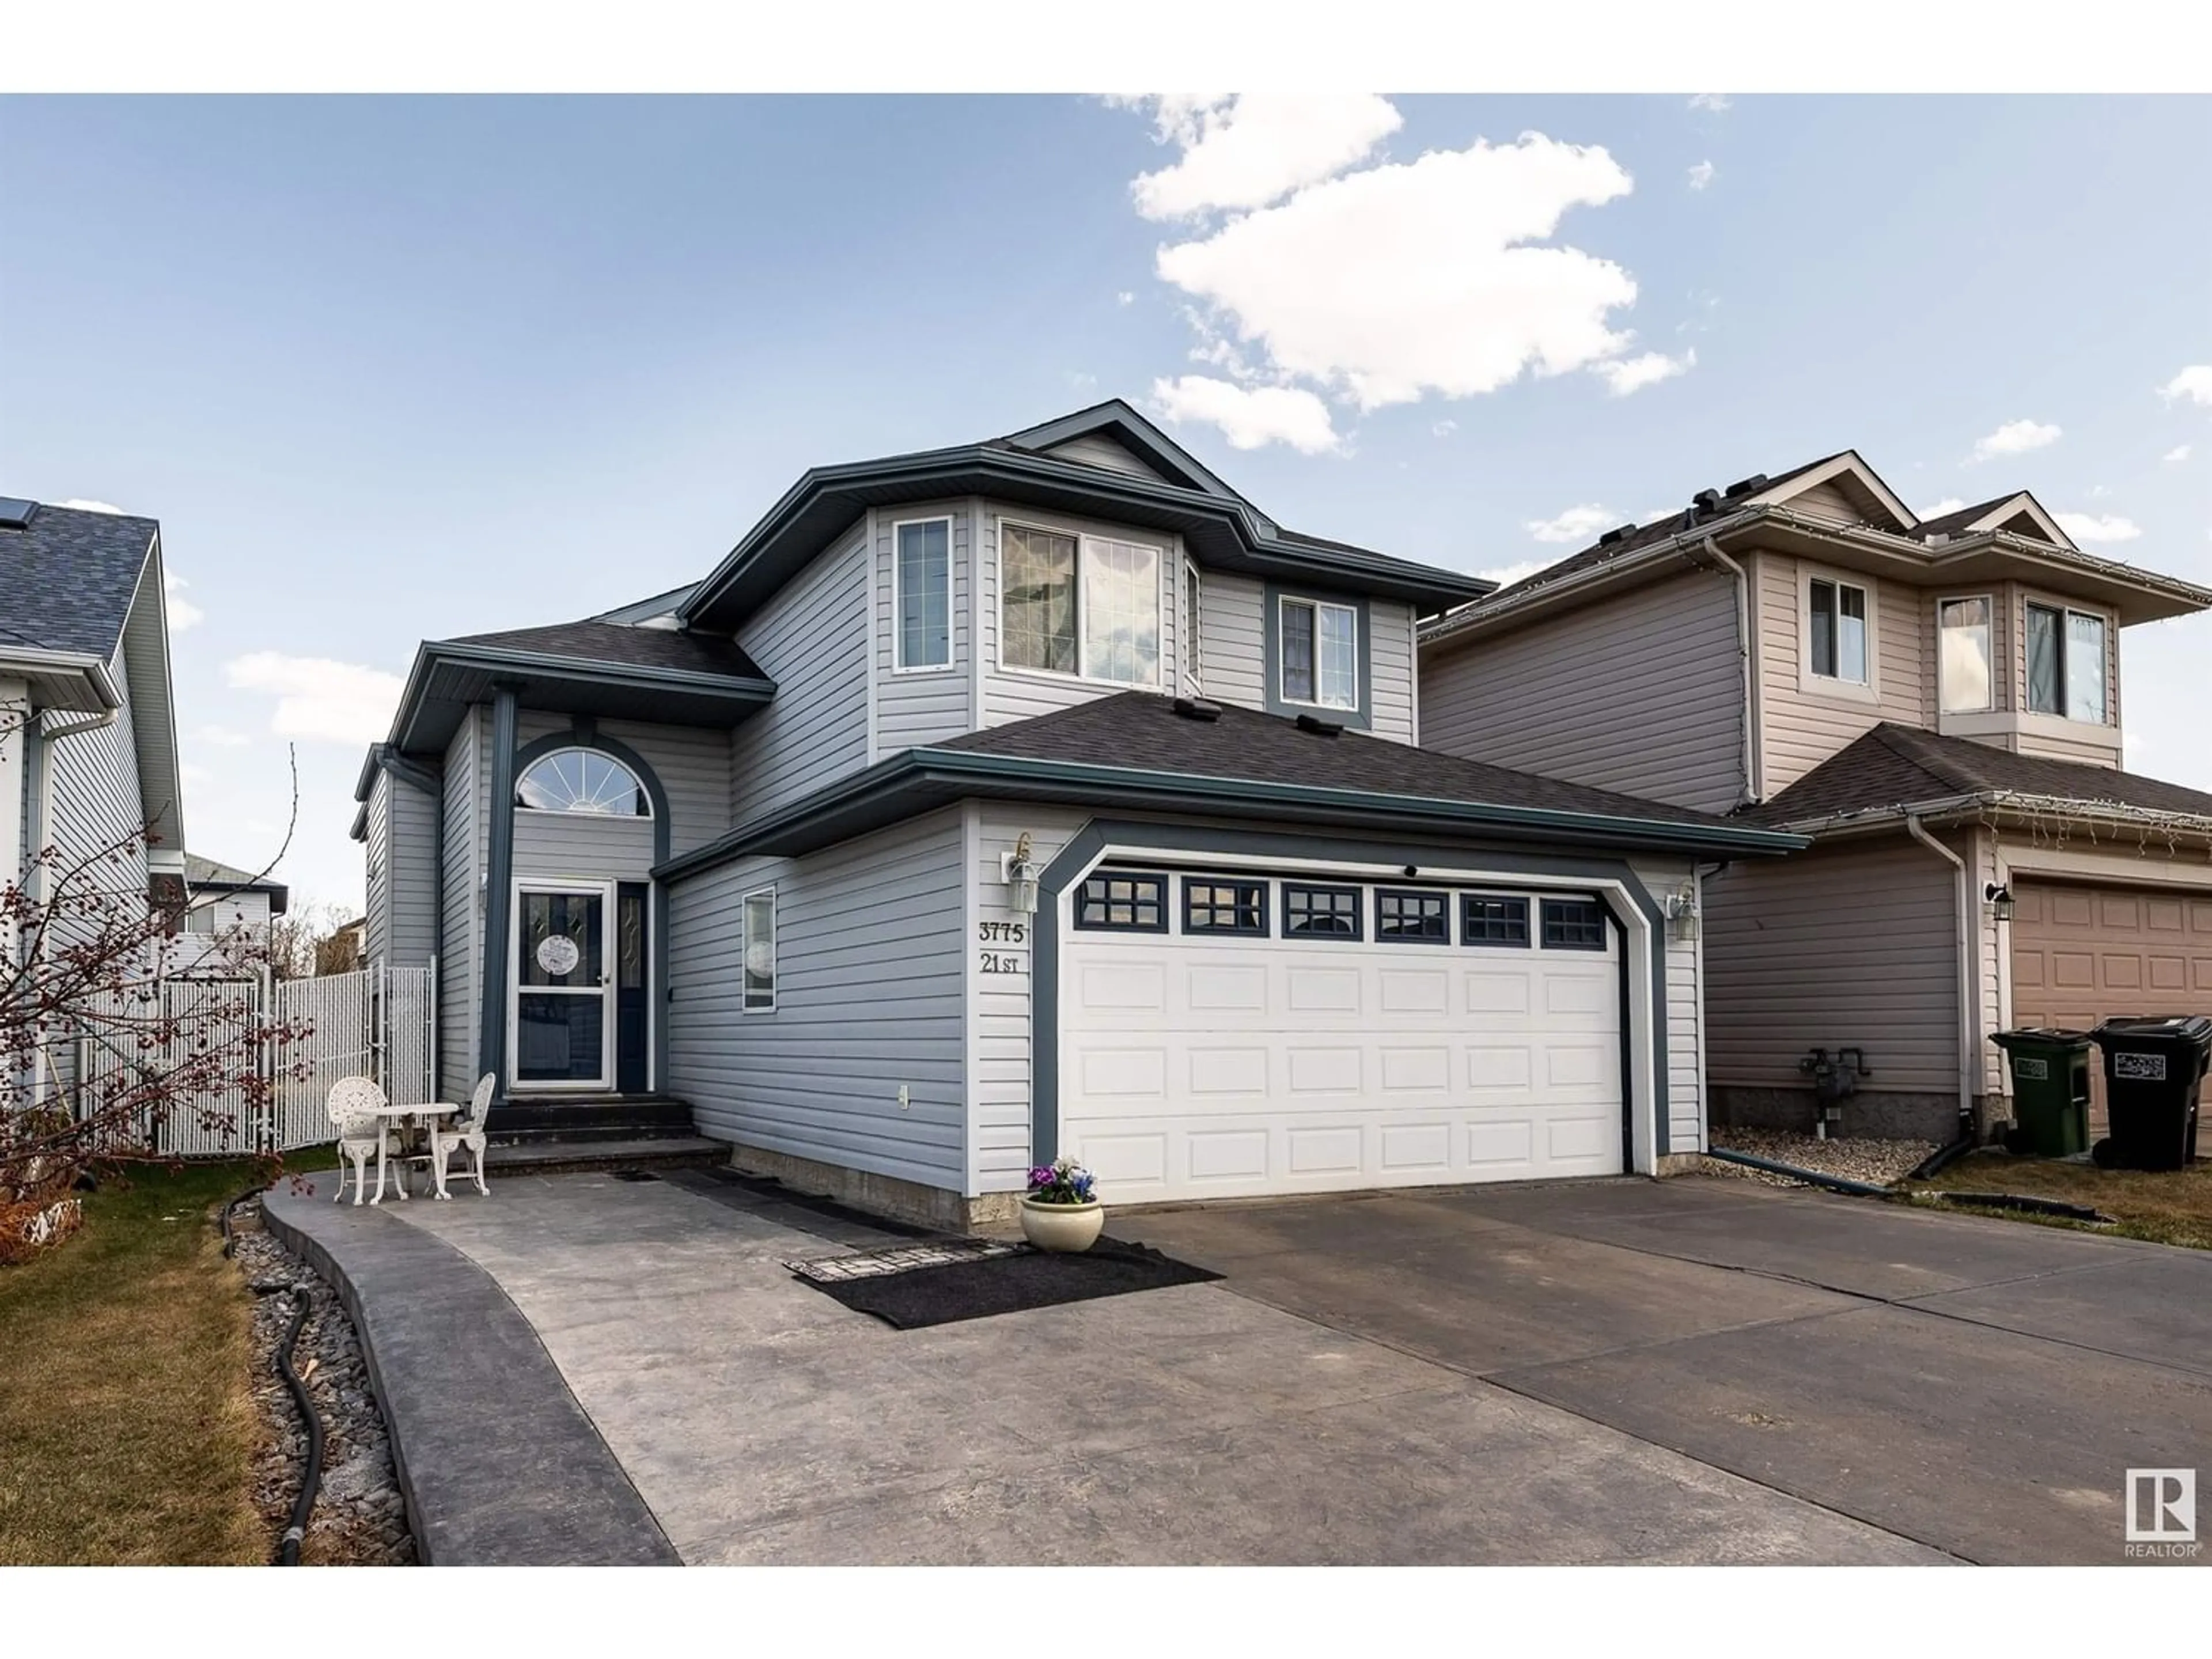 Frontside or backside of a home for 3775 21 ST NW, Edmonton Alberta T6T1R5